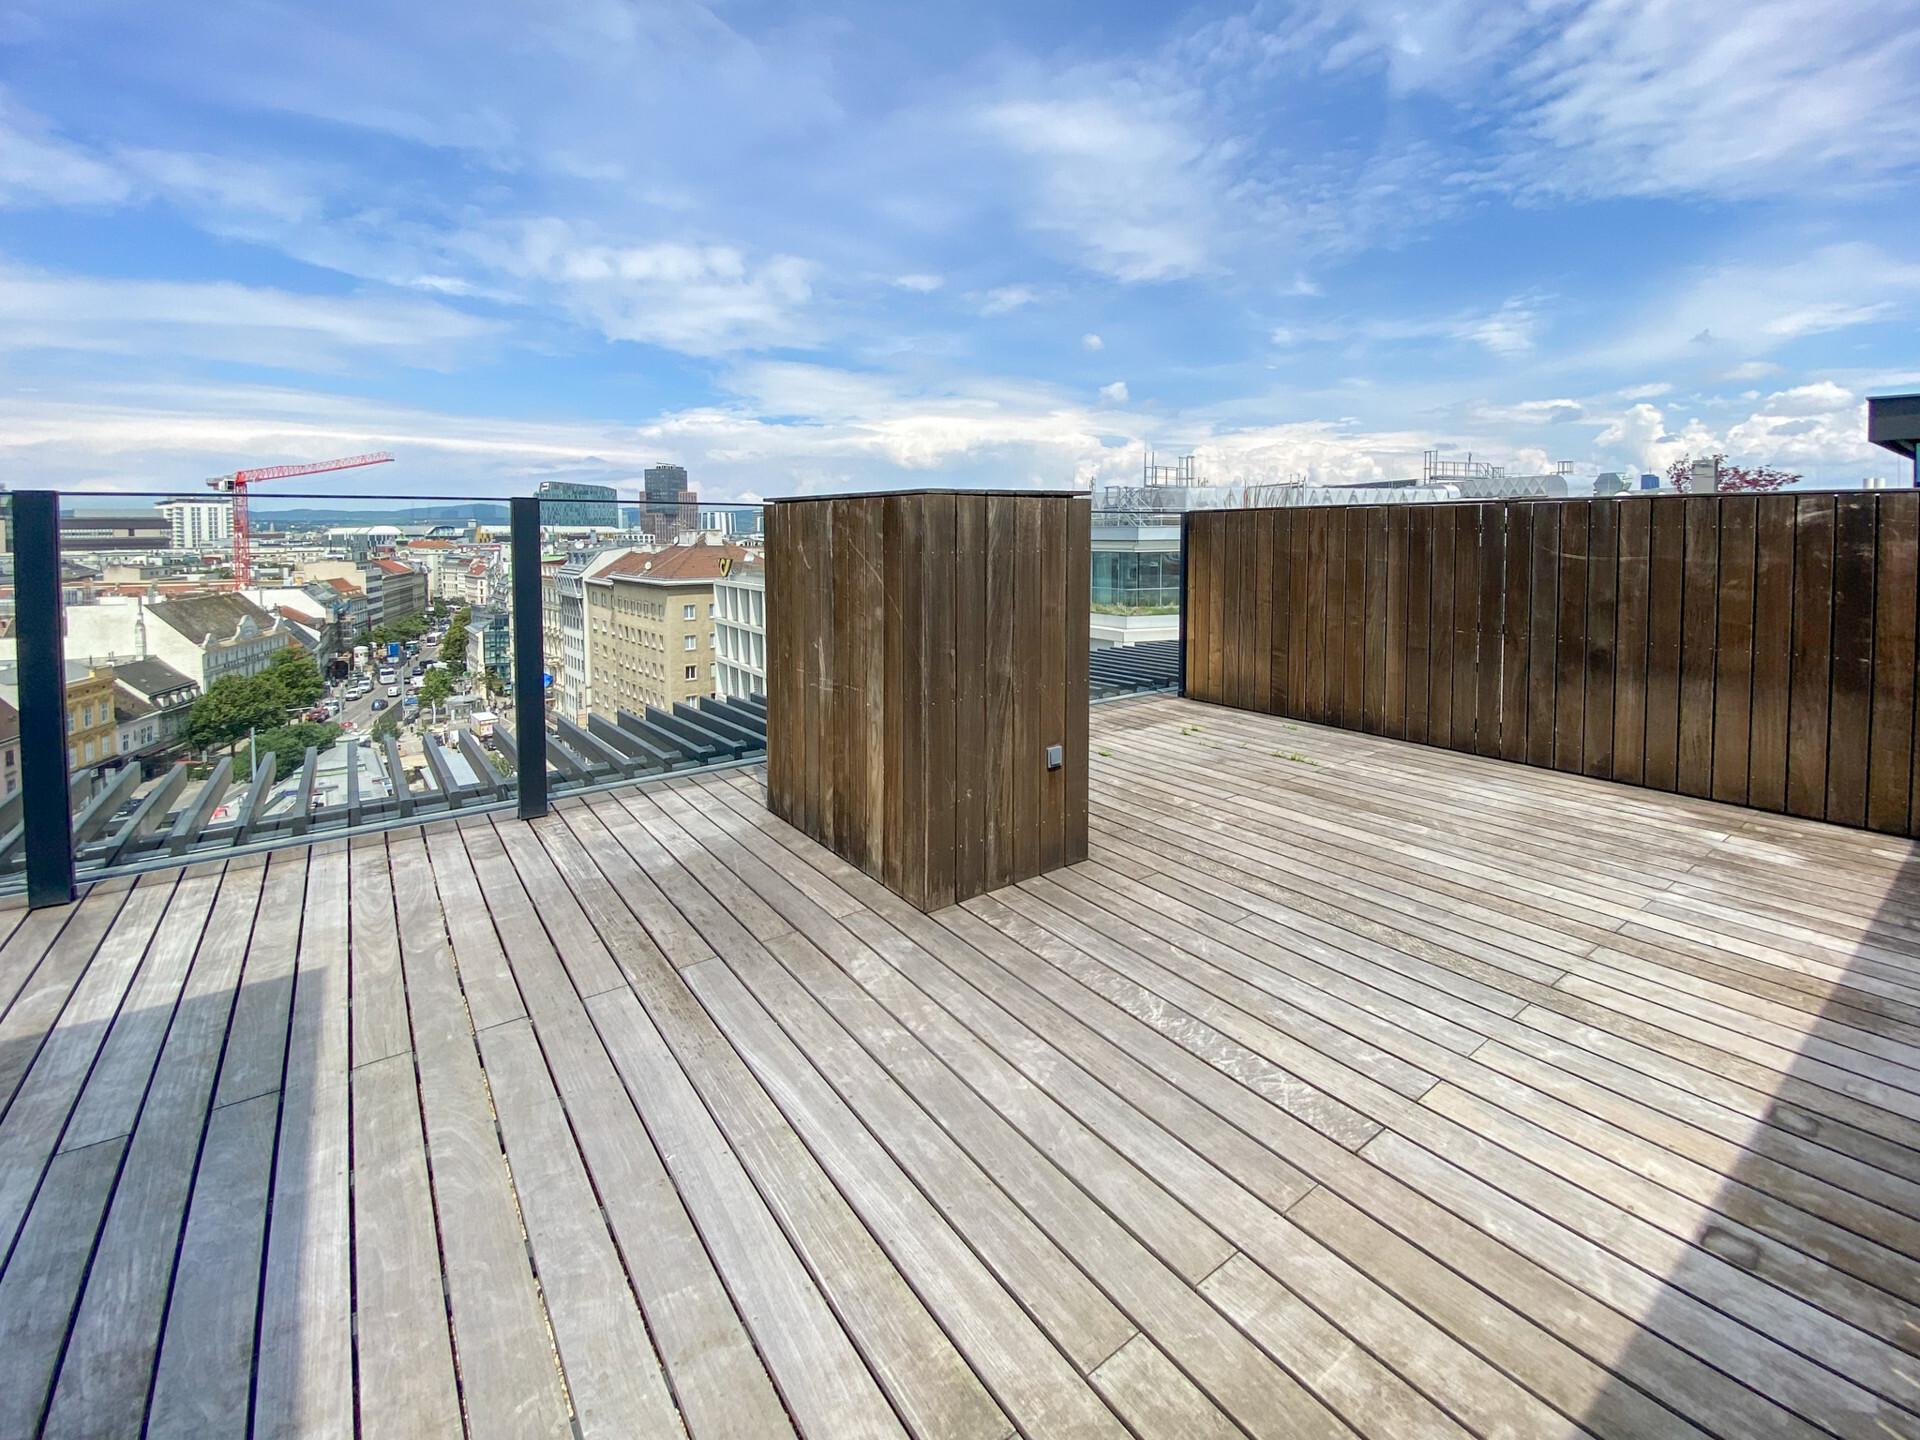 2-room apartment with approx. 54 m² roof terrace in FIFTY FIVE at Rochusmarkt - Rent 1030 Vienna